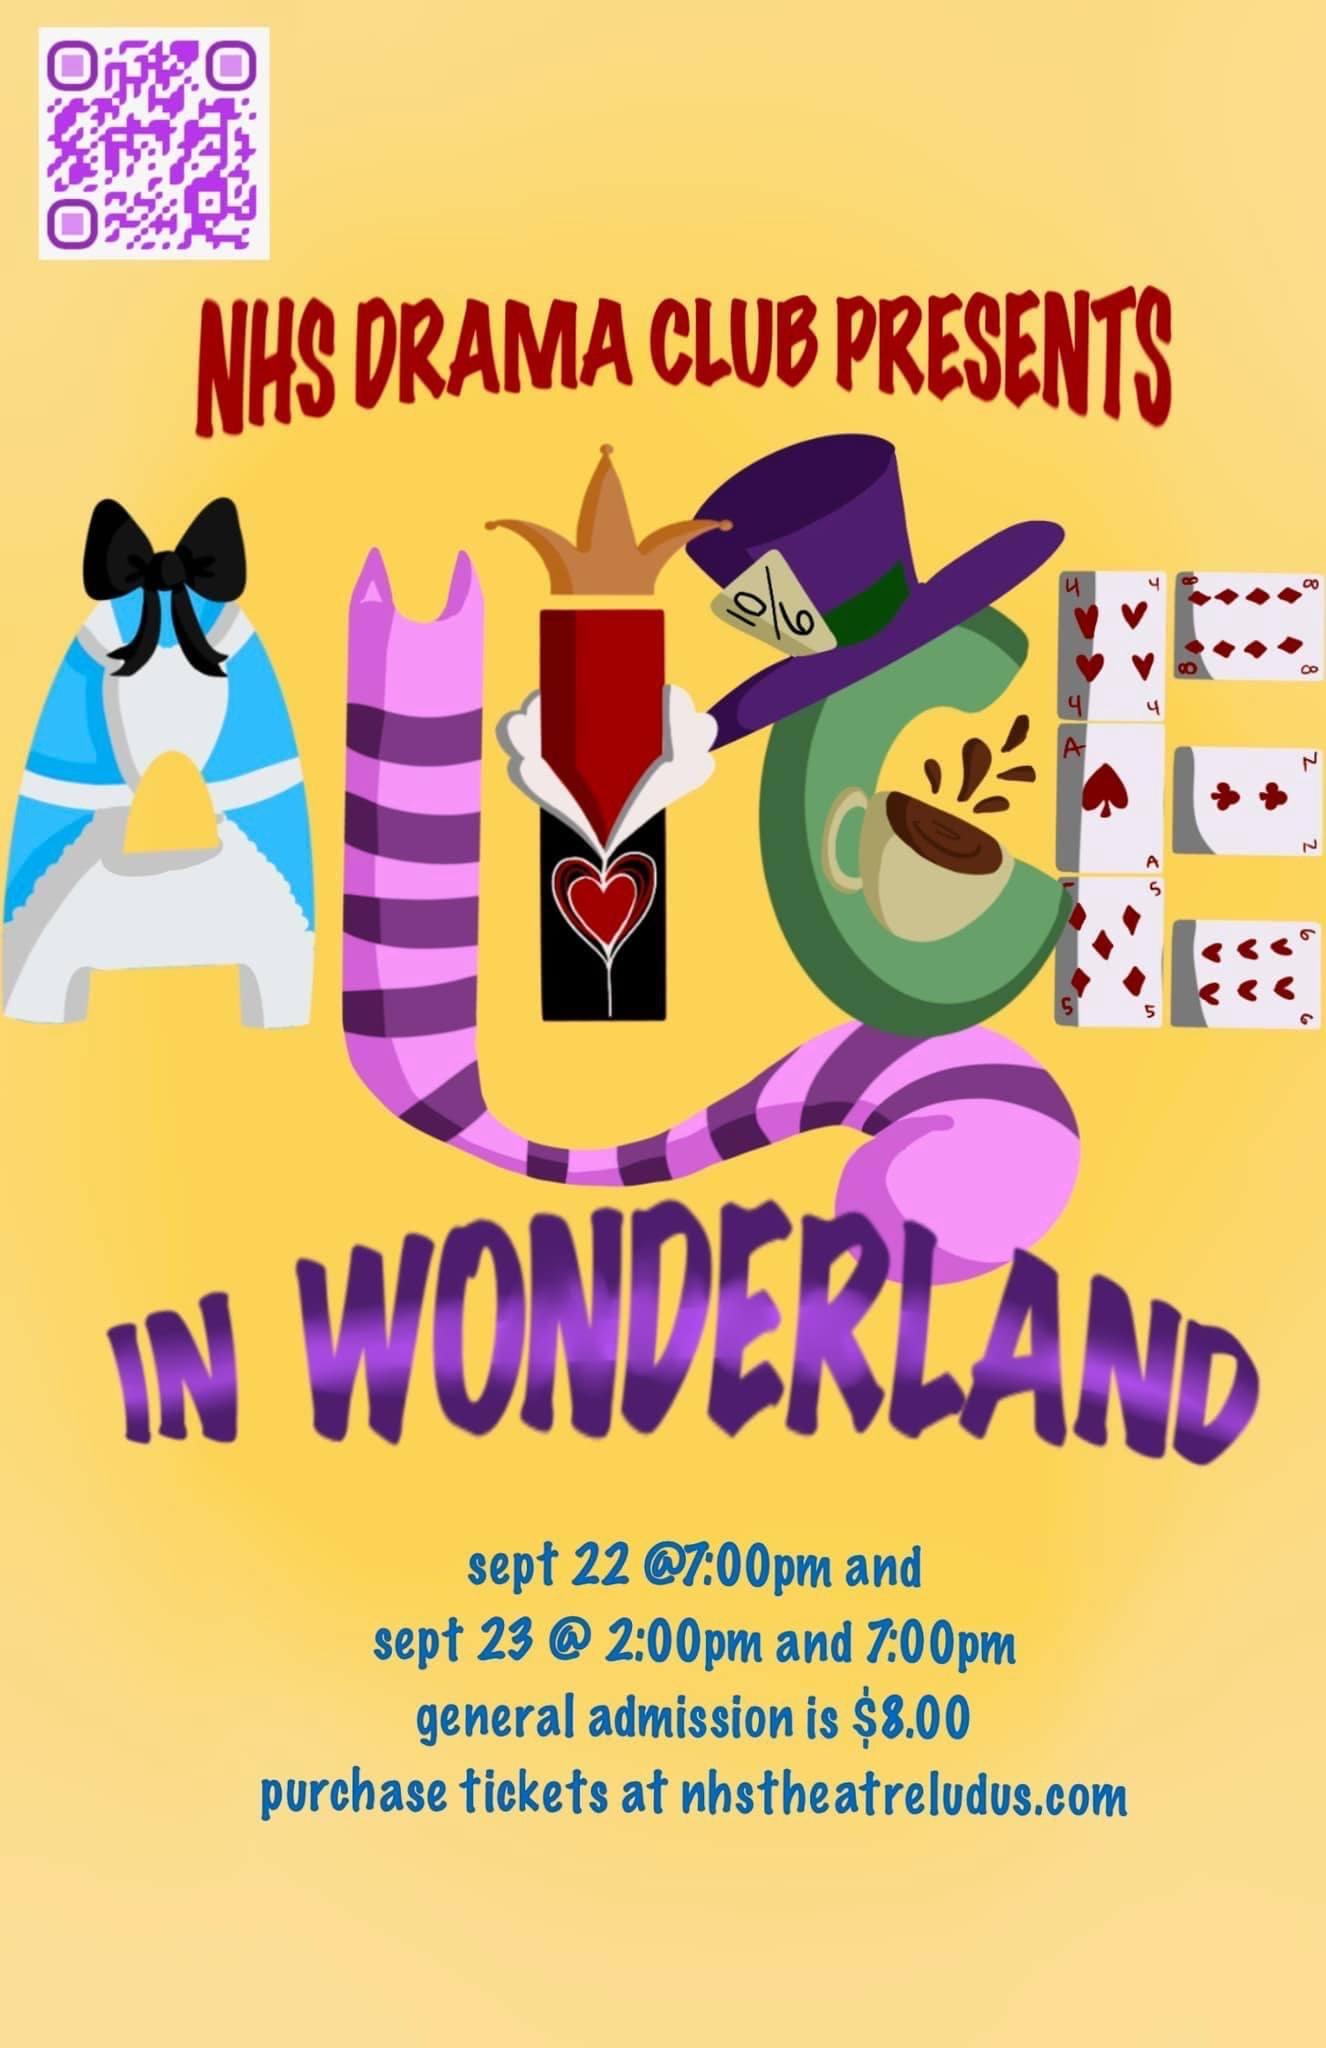 NHS Drama Club Presents Alice in Wonderland - September 22 at 7pm and September 23 at 2pm and 7pm. General admission is $8. Purchase tickets at nhstheatreludos.com